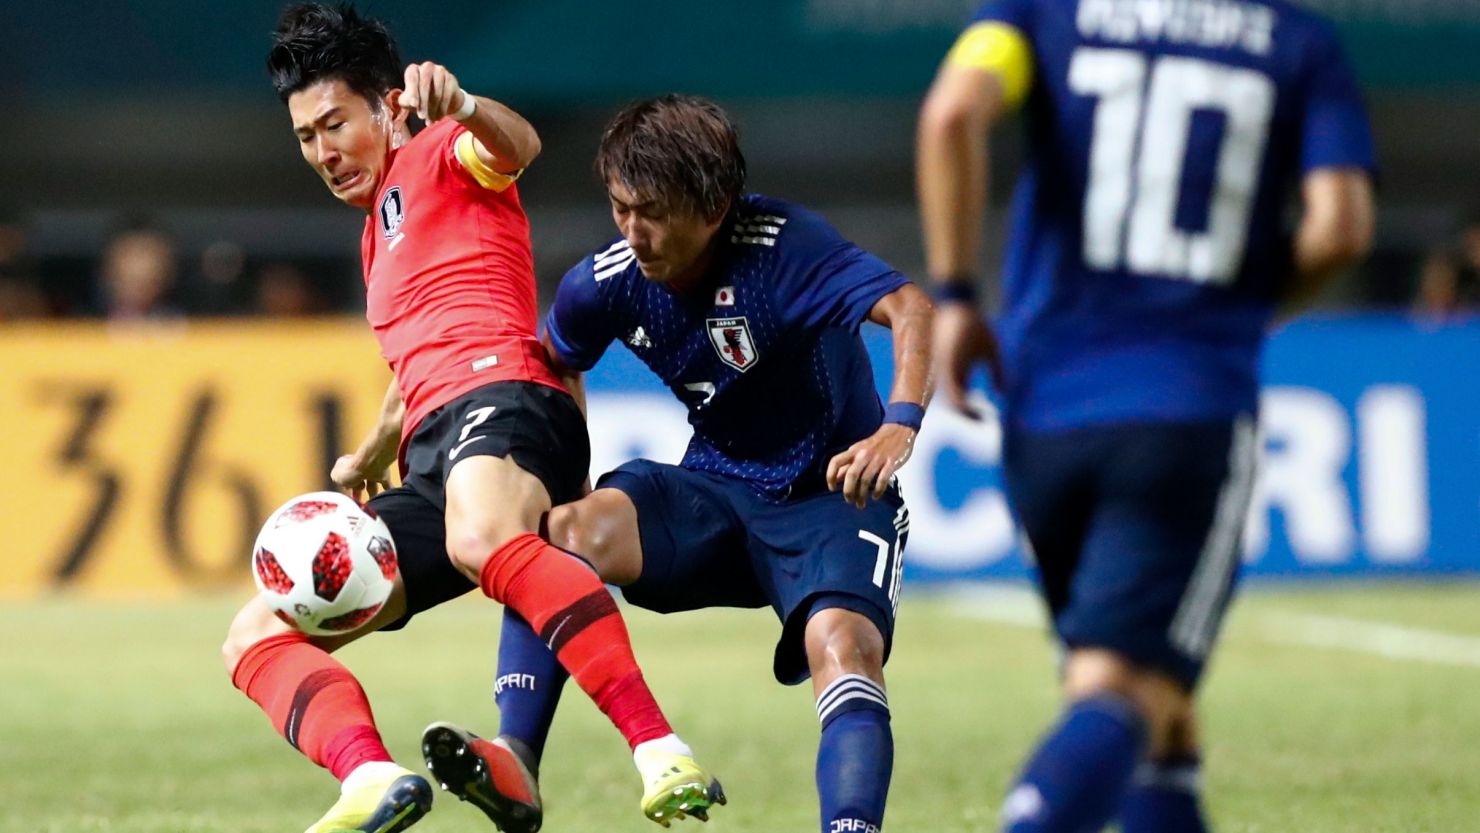 South Korea's Son Heung-min, left, duels for the ball against Japan's Teruki Hara during Saturday's match.